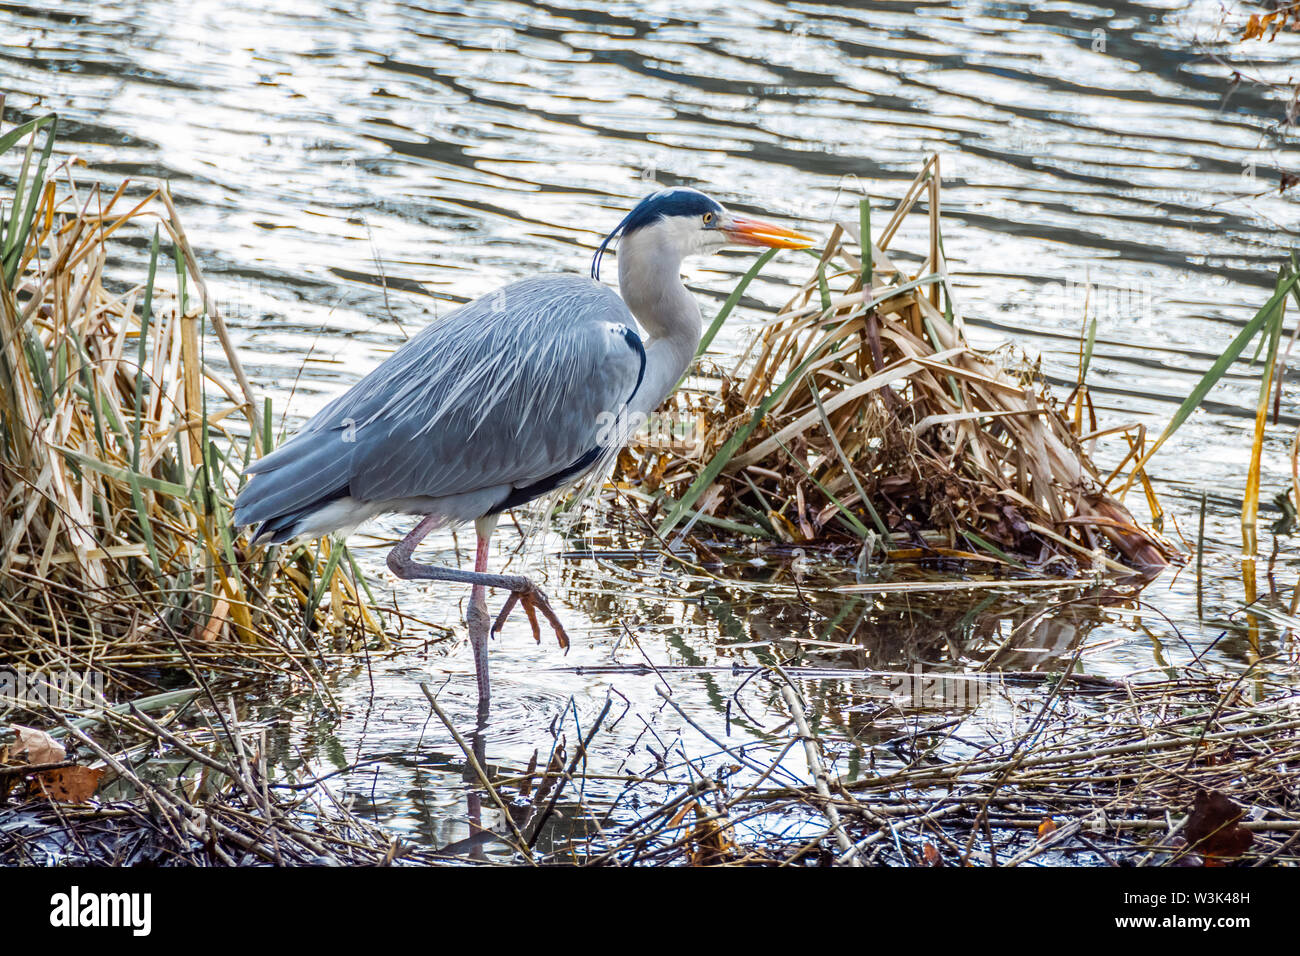 A Great Blue Heron bird hunting on the canalside 2 Stock Photo